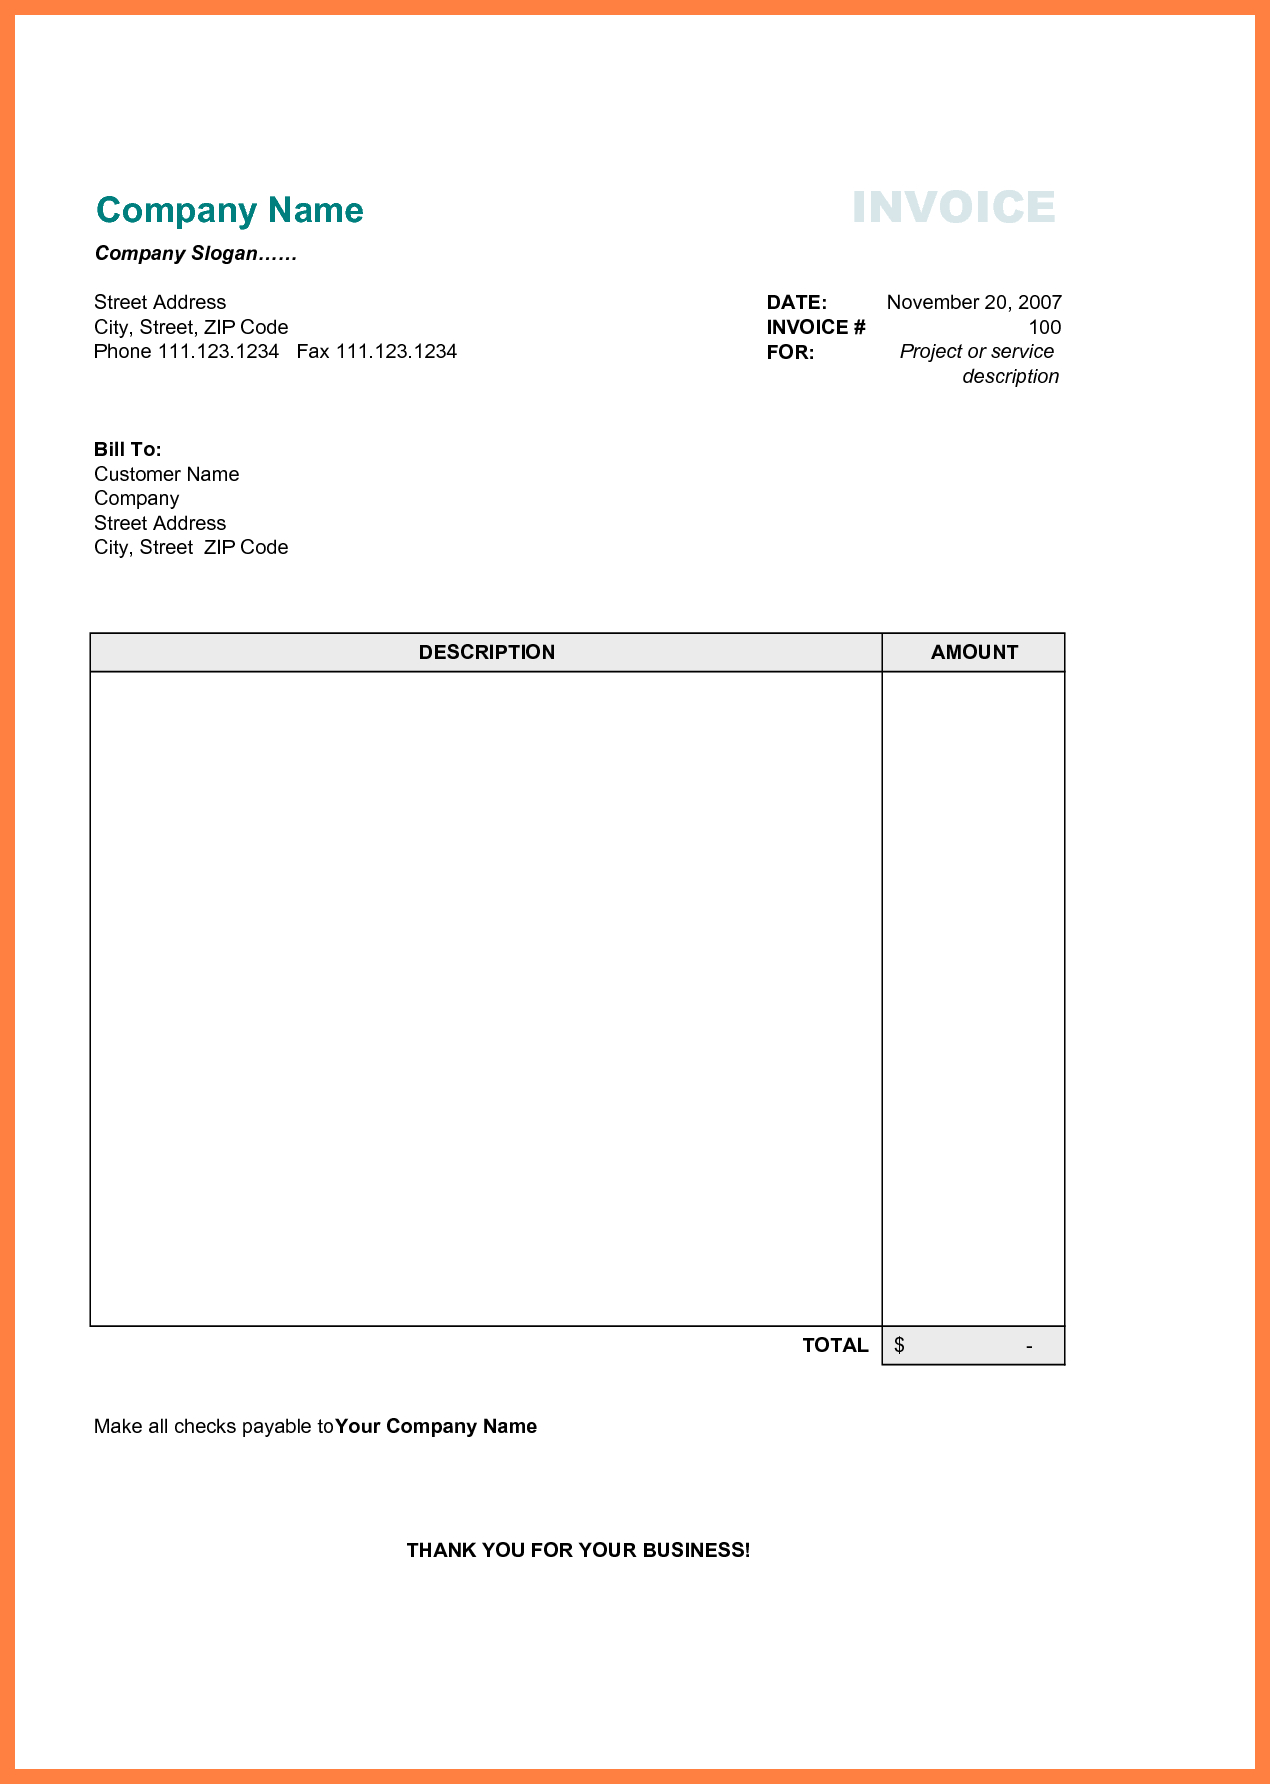 Free Printable Business Invoice Template - Invoice Format In Excel - Free Printable Invoice Templates